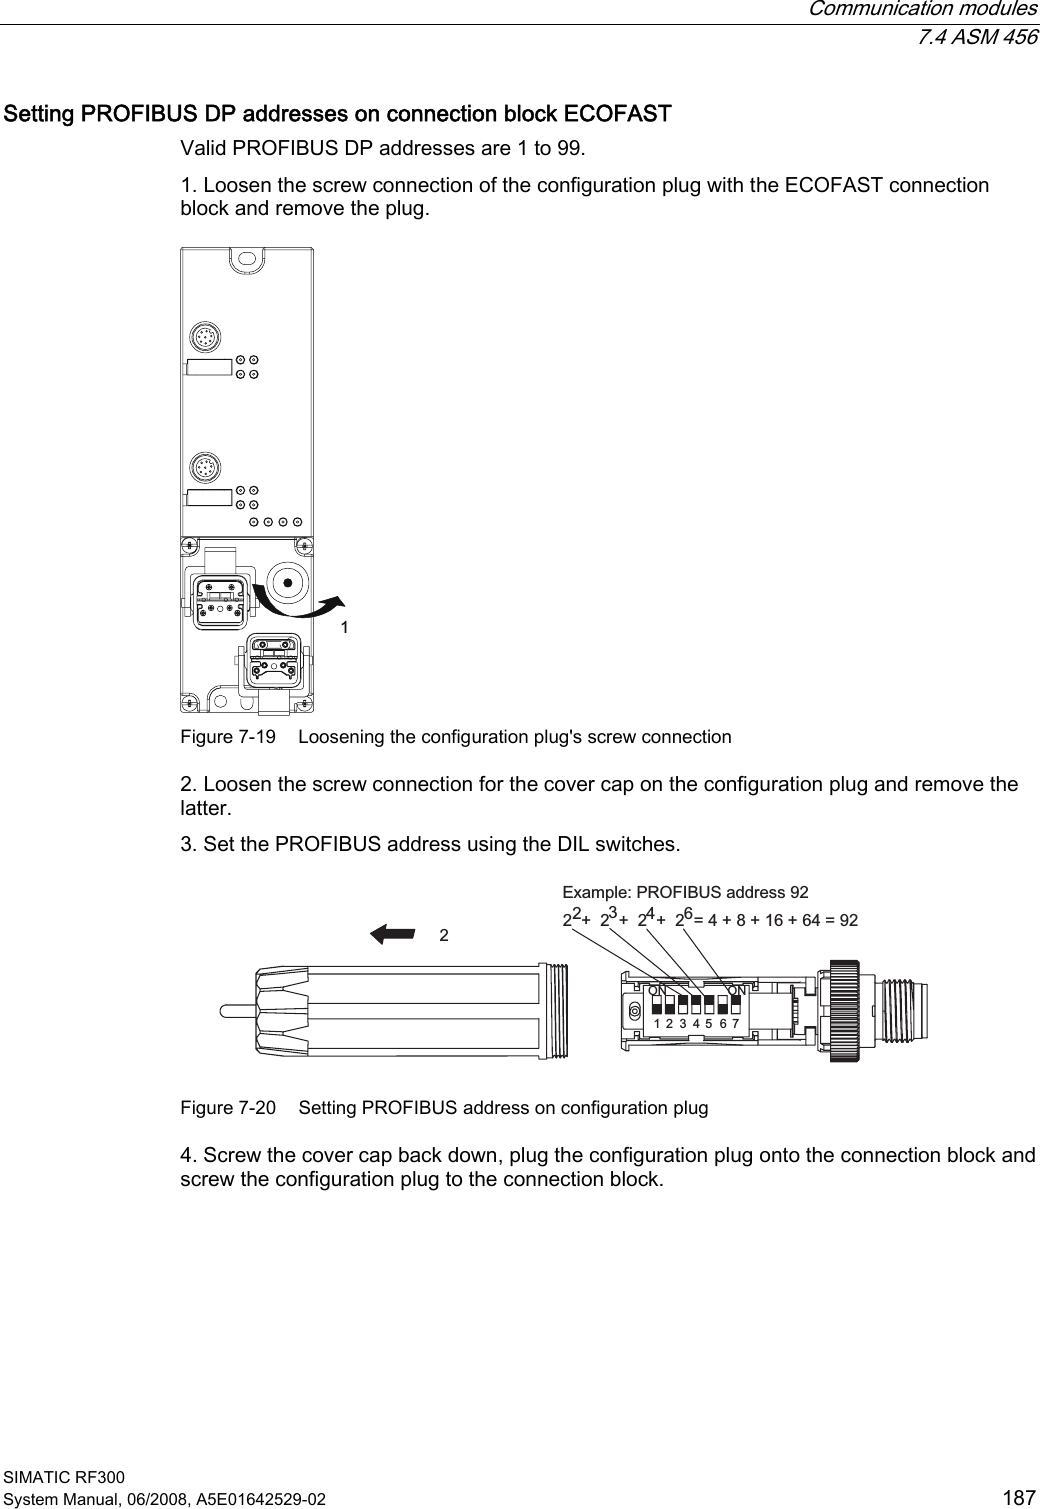  Communication modules  7.4 ASM 456 SIMATIC RF300 System Manual, 06/2008, A5E01642529-02  187 Setting PROFIBUS DP addresses on connection block ECOFAST Valid PROFIBUS DP addresses are 1 to 99.  1. Loosen the screw connection of the configuration plug with the ECOFAST connection block and remove the plug.  Figure 7-19  Loosening the configuration plug&apos;s screw connection 2. Loosen the screw connection for the cover cap on the configuration plug and remove the latter. 3. Set the PROFIBUS address using the DIL switches. ([DPSOH352),%86DGGUHVV  21 21  Figure 7-20  Setting PROFIBUS address on configuration plug 4. Screw the cover cap back down, plug the configuration plug onto the connection block and screw the configuration plug to the connection block. 